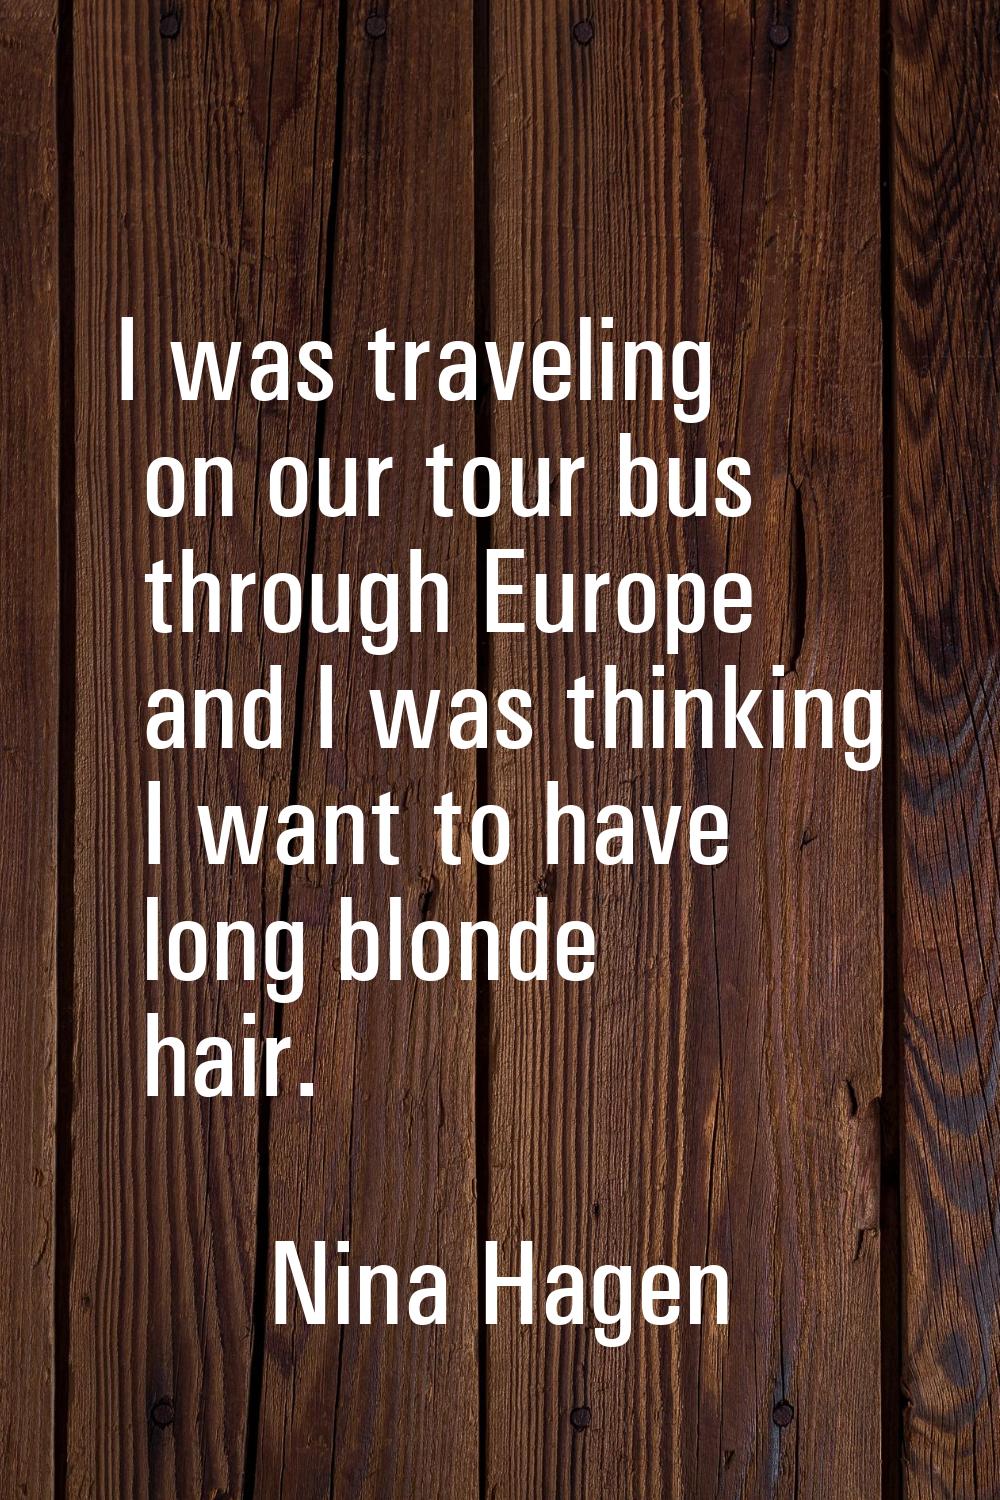 I was traveling on our tour bus through Europe and I was thinking I want to have long blonde hair.